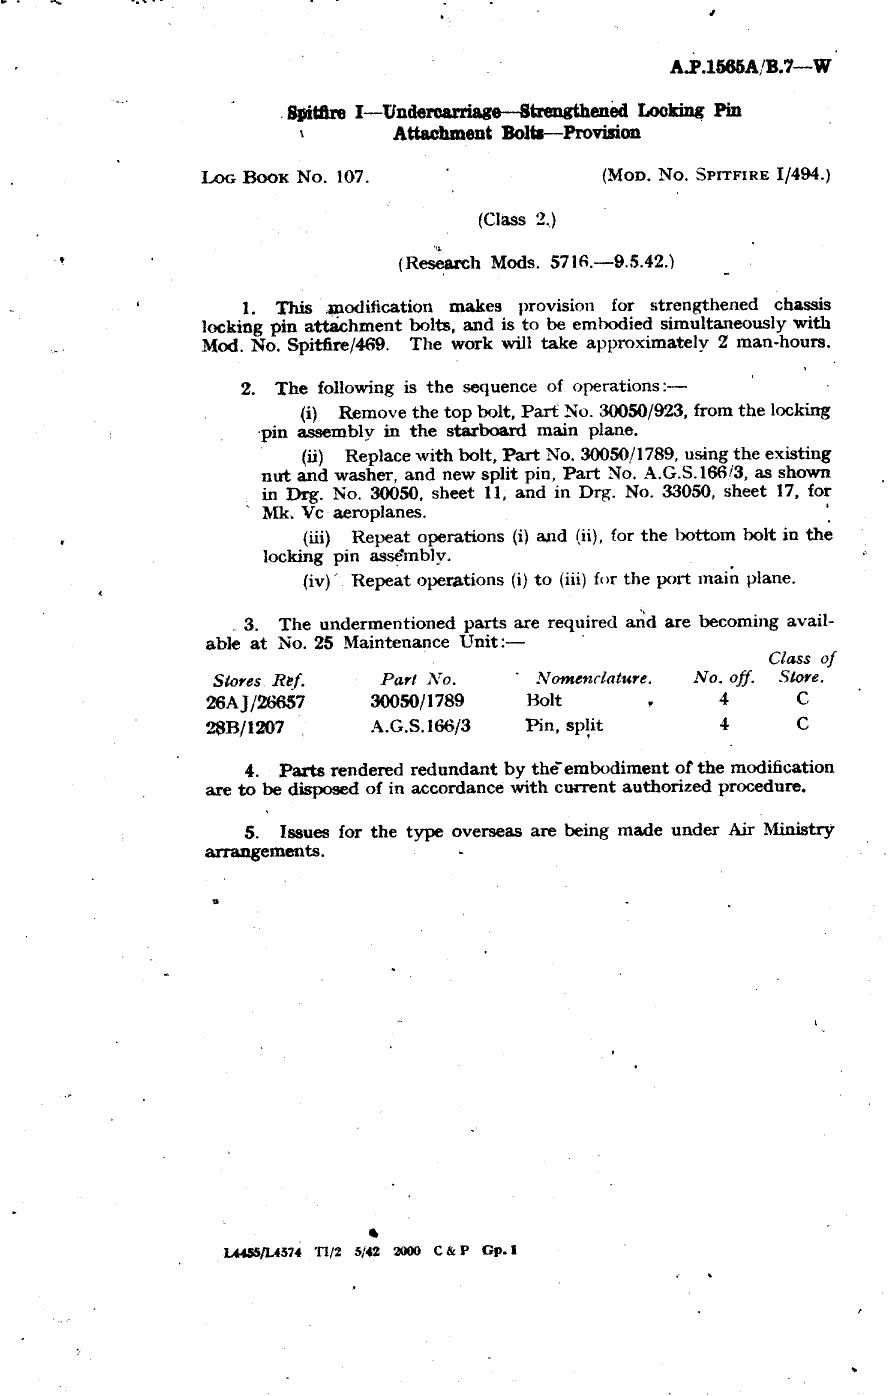 Sample page 1 from AirCorps Library document: Spitfire I Undercarriage Strengthened Locking Pin Attachment Bolts Provision